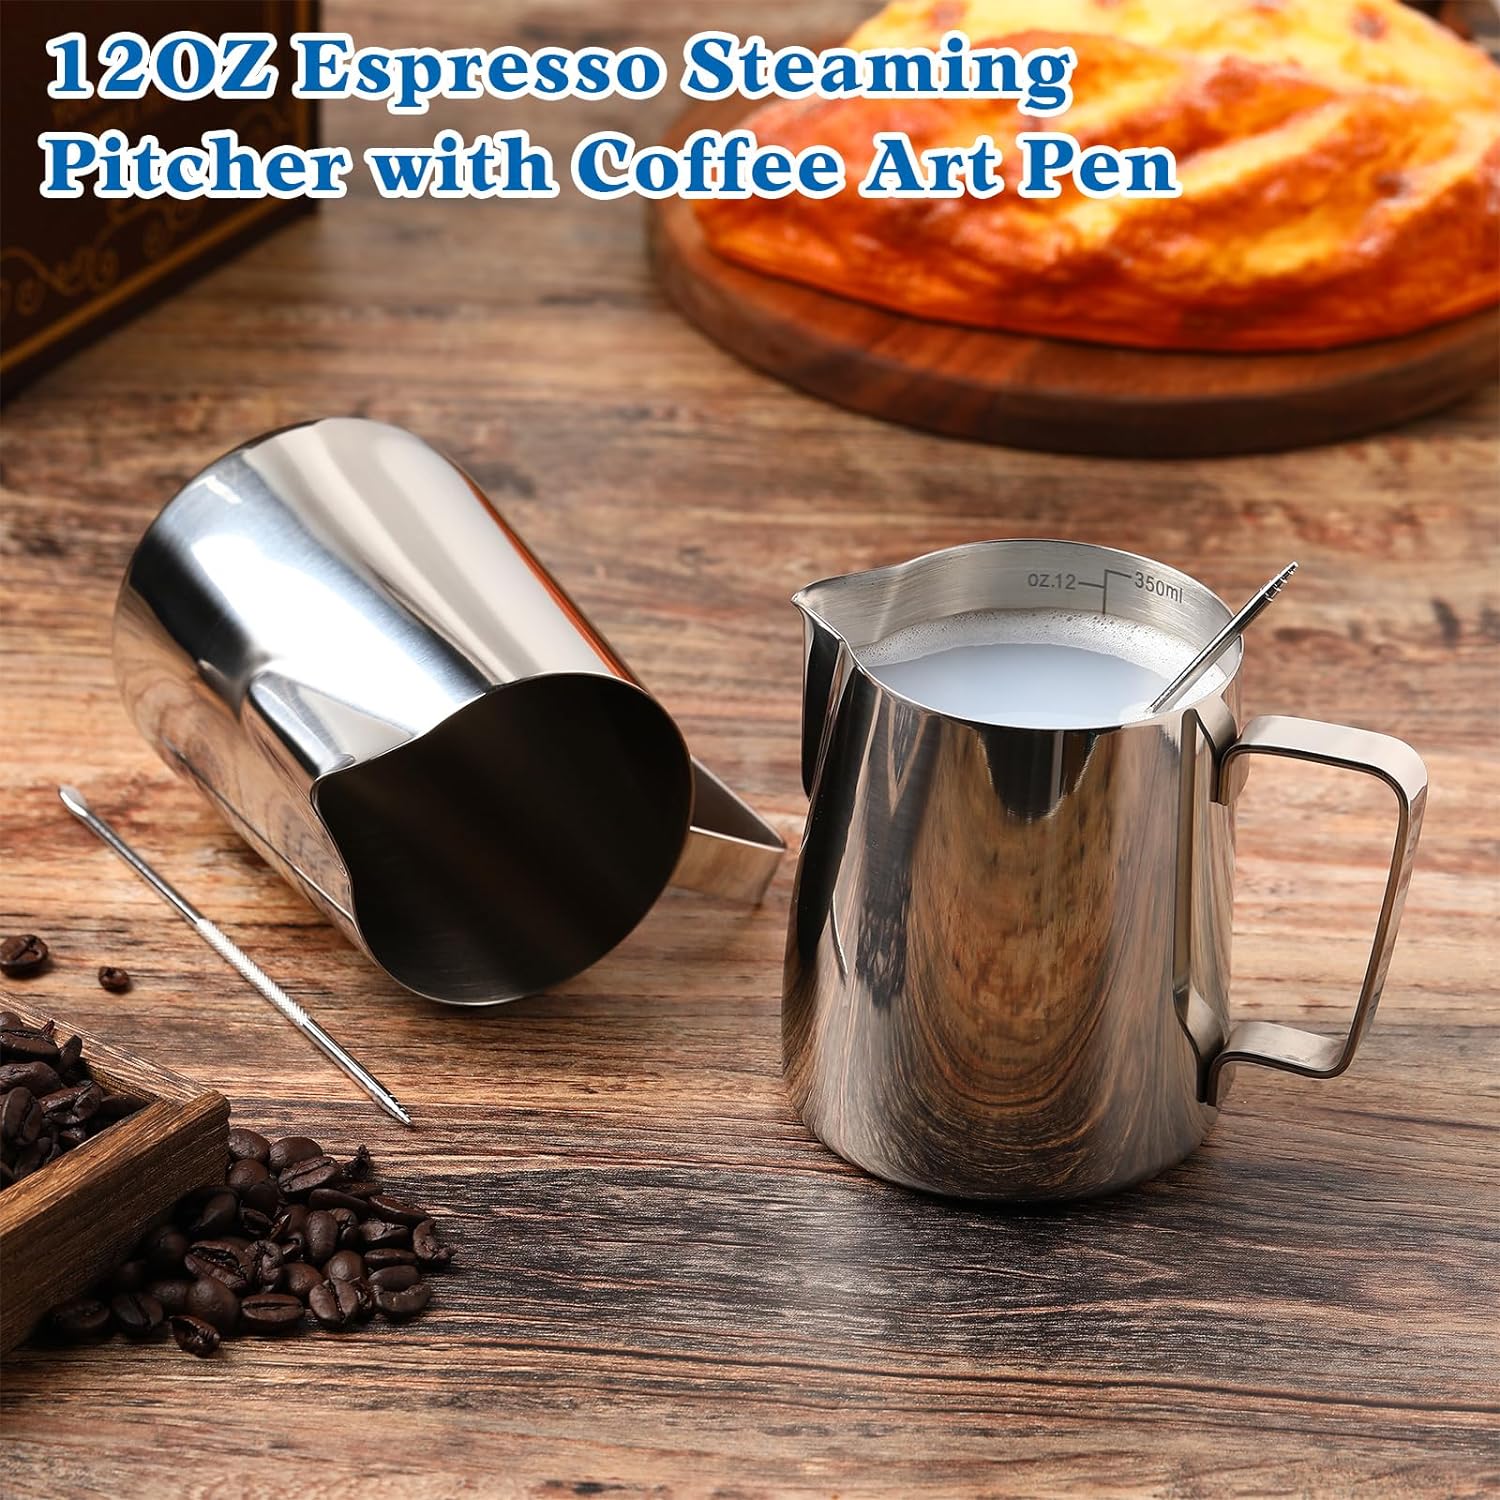 4 Pcs Milk Frothing Pitcher 12 oz Espresso Steaming Pitcher Milk Frother Cup with Latte Art Pen Stainless Steel Coffee Bar Espresso Machine Accessories Cappuccino Barista Tools Milk Jug Cup